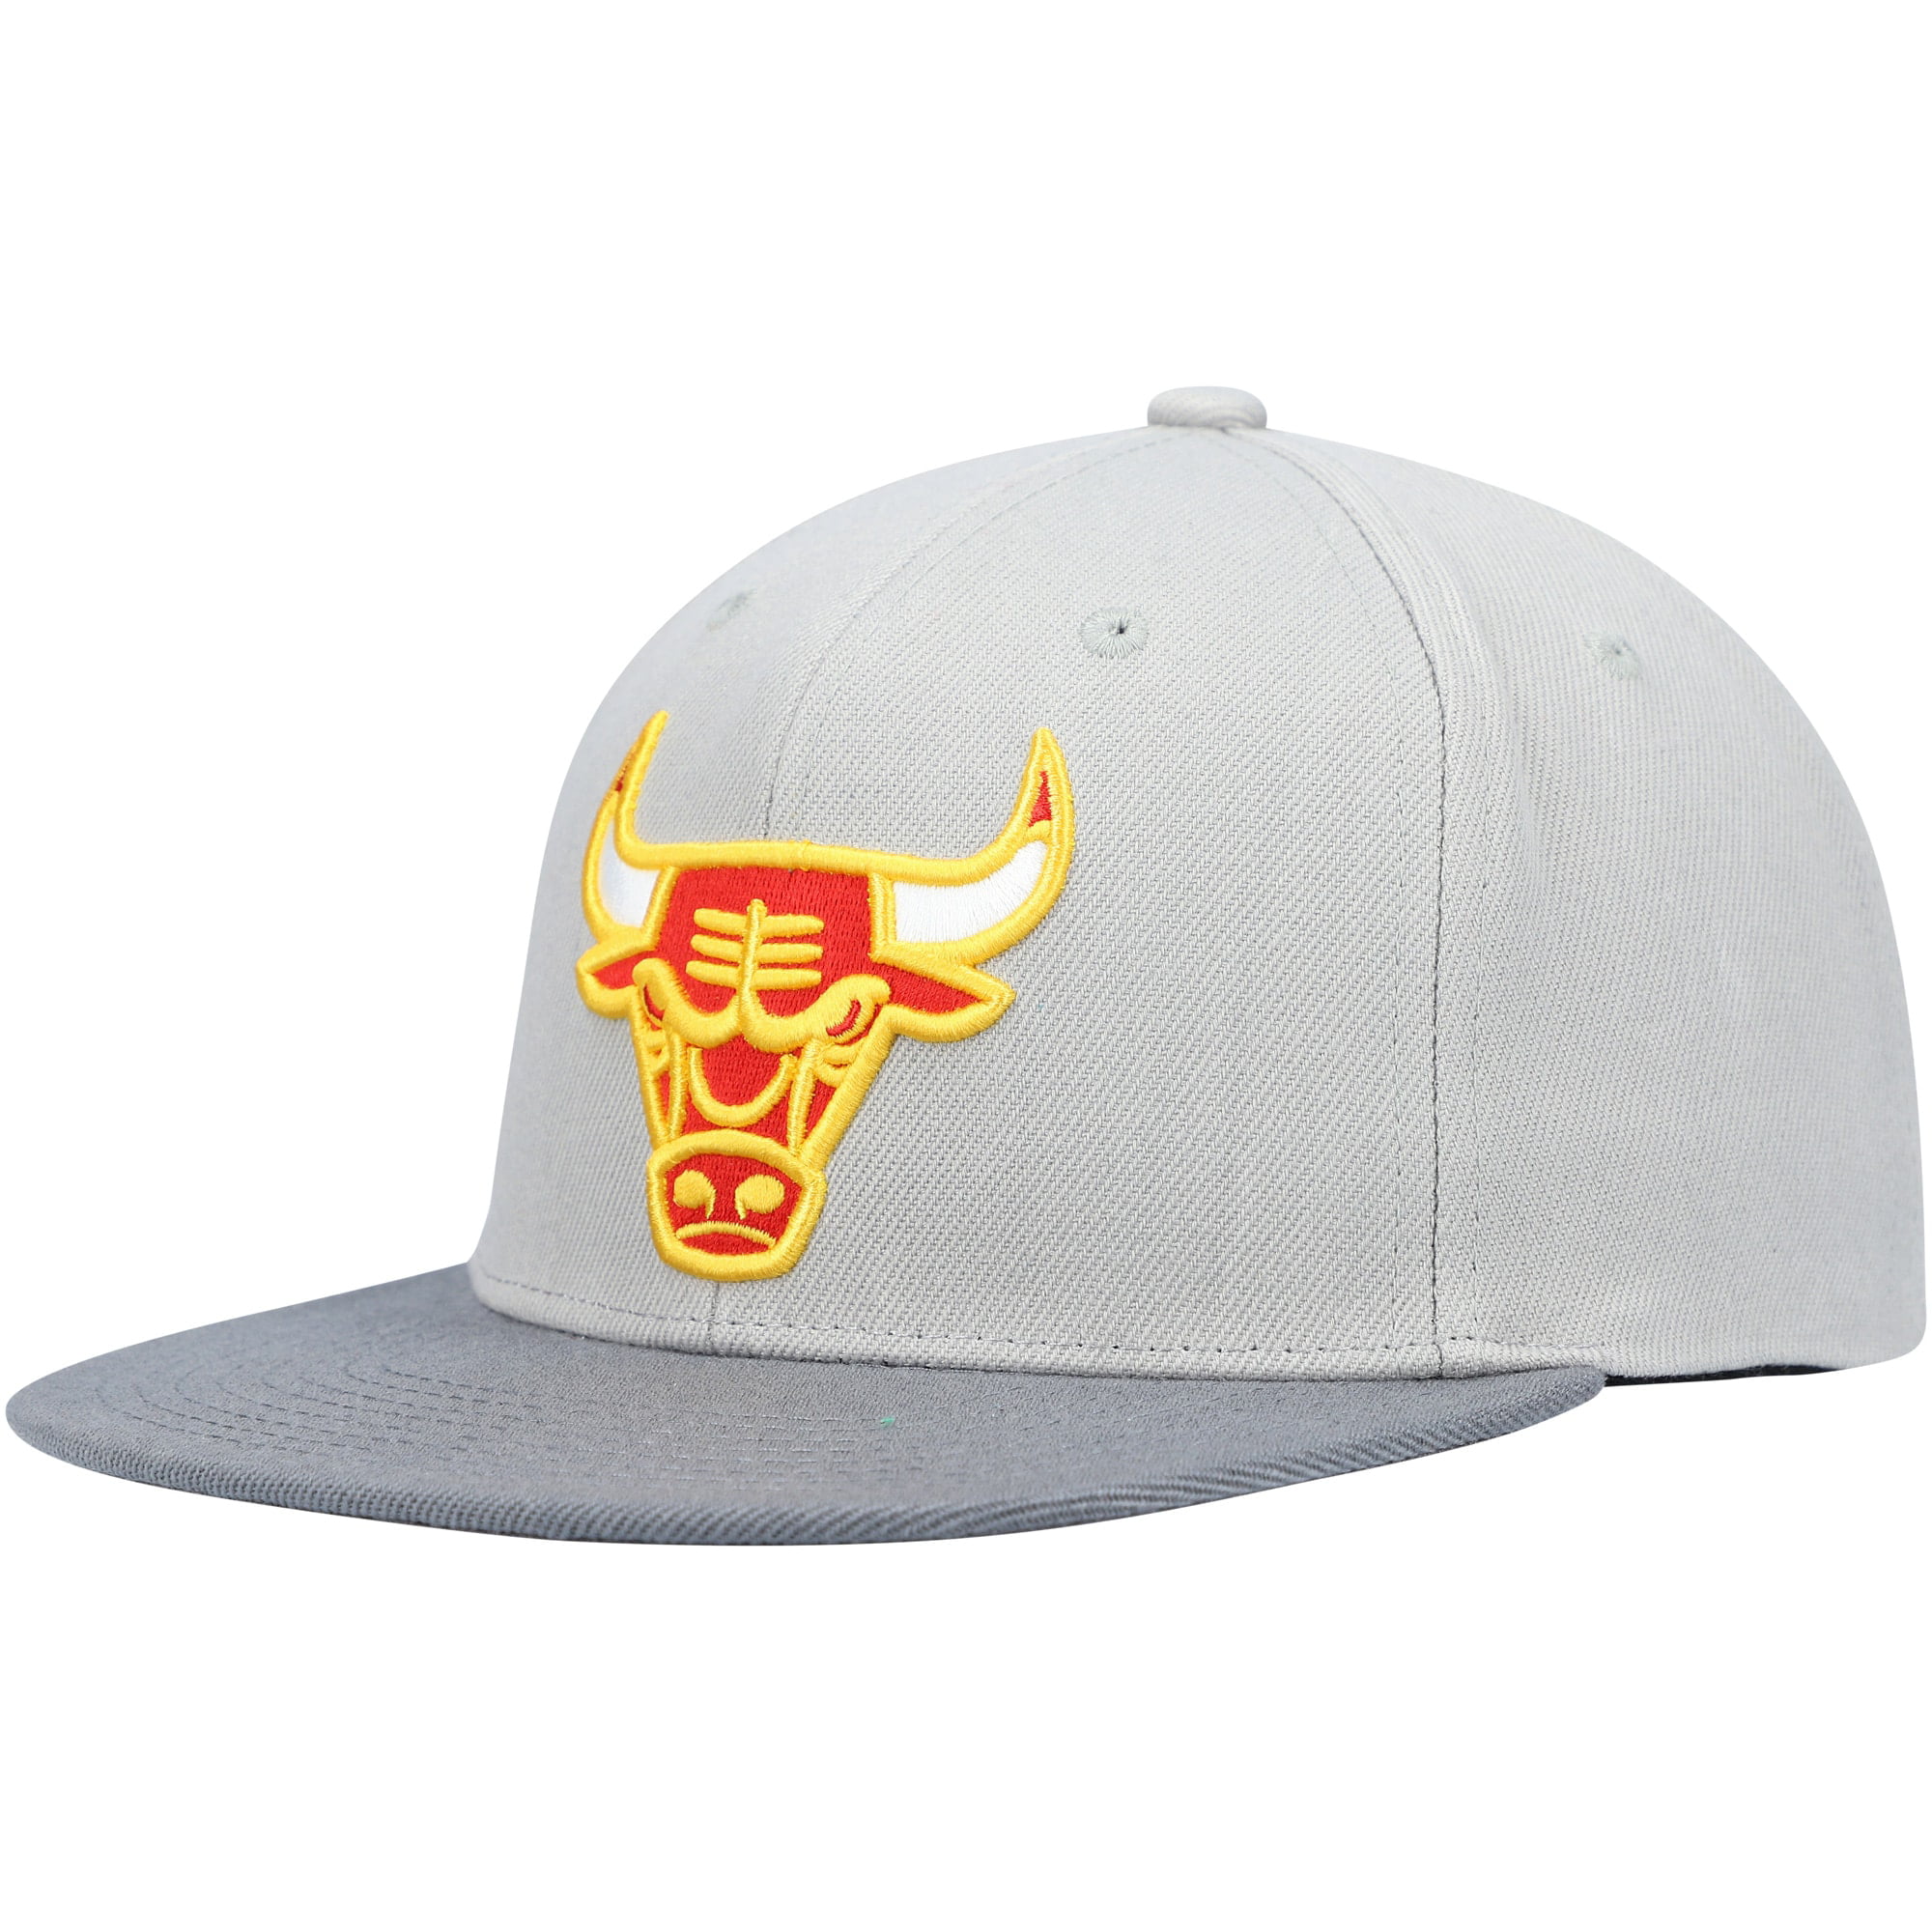 Mitchell & Ness Chicago Bulls The Road Finals Snapback 